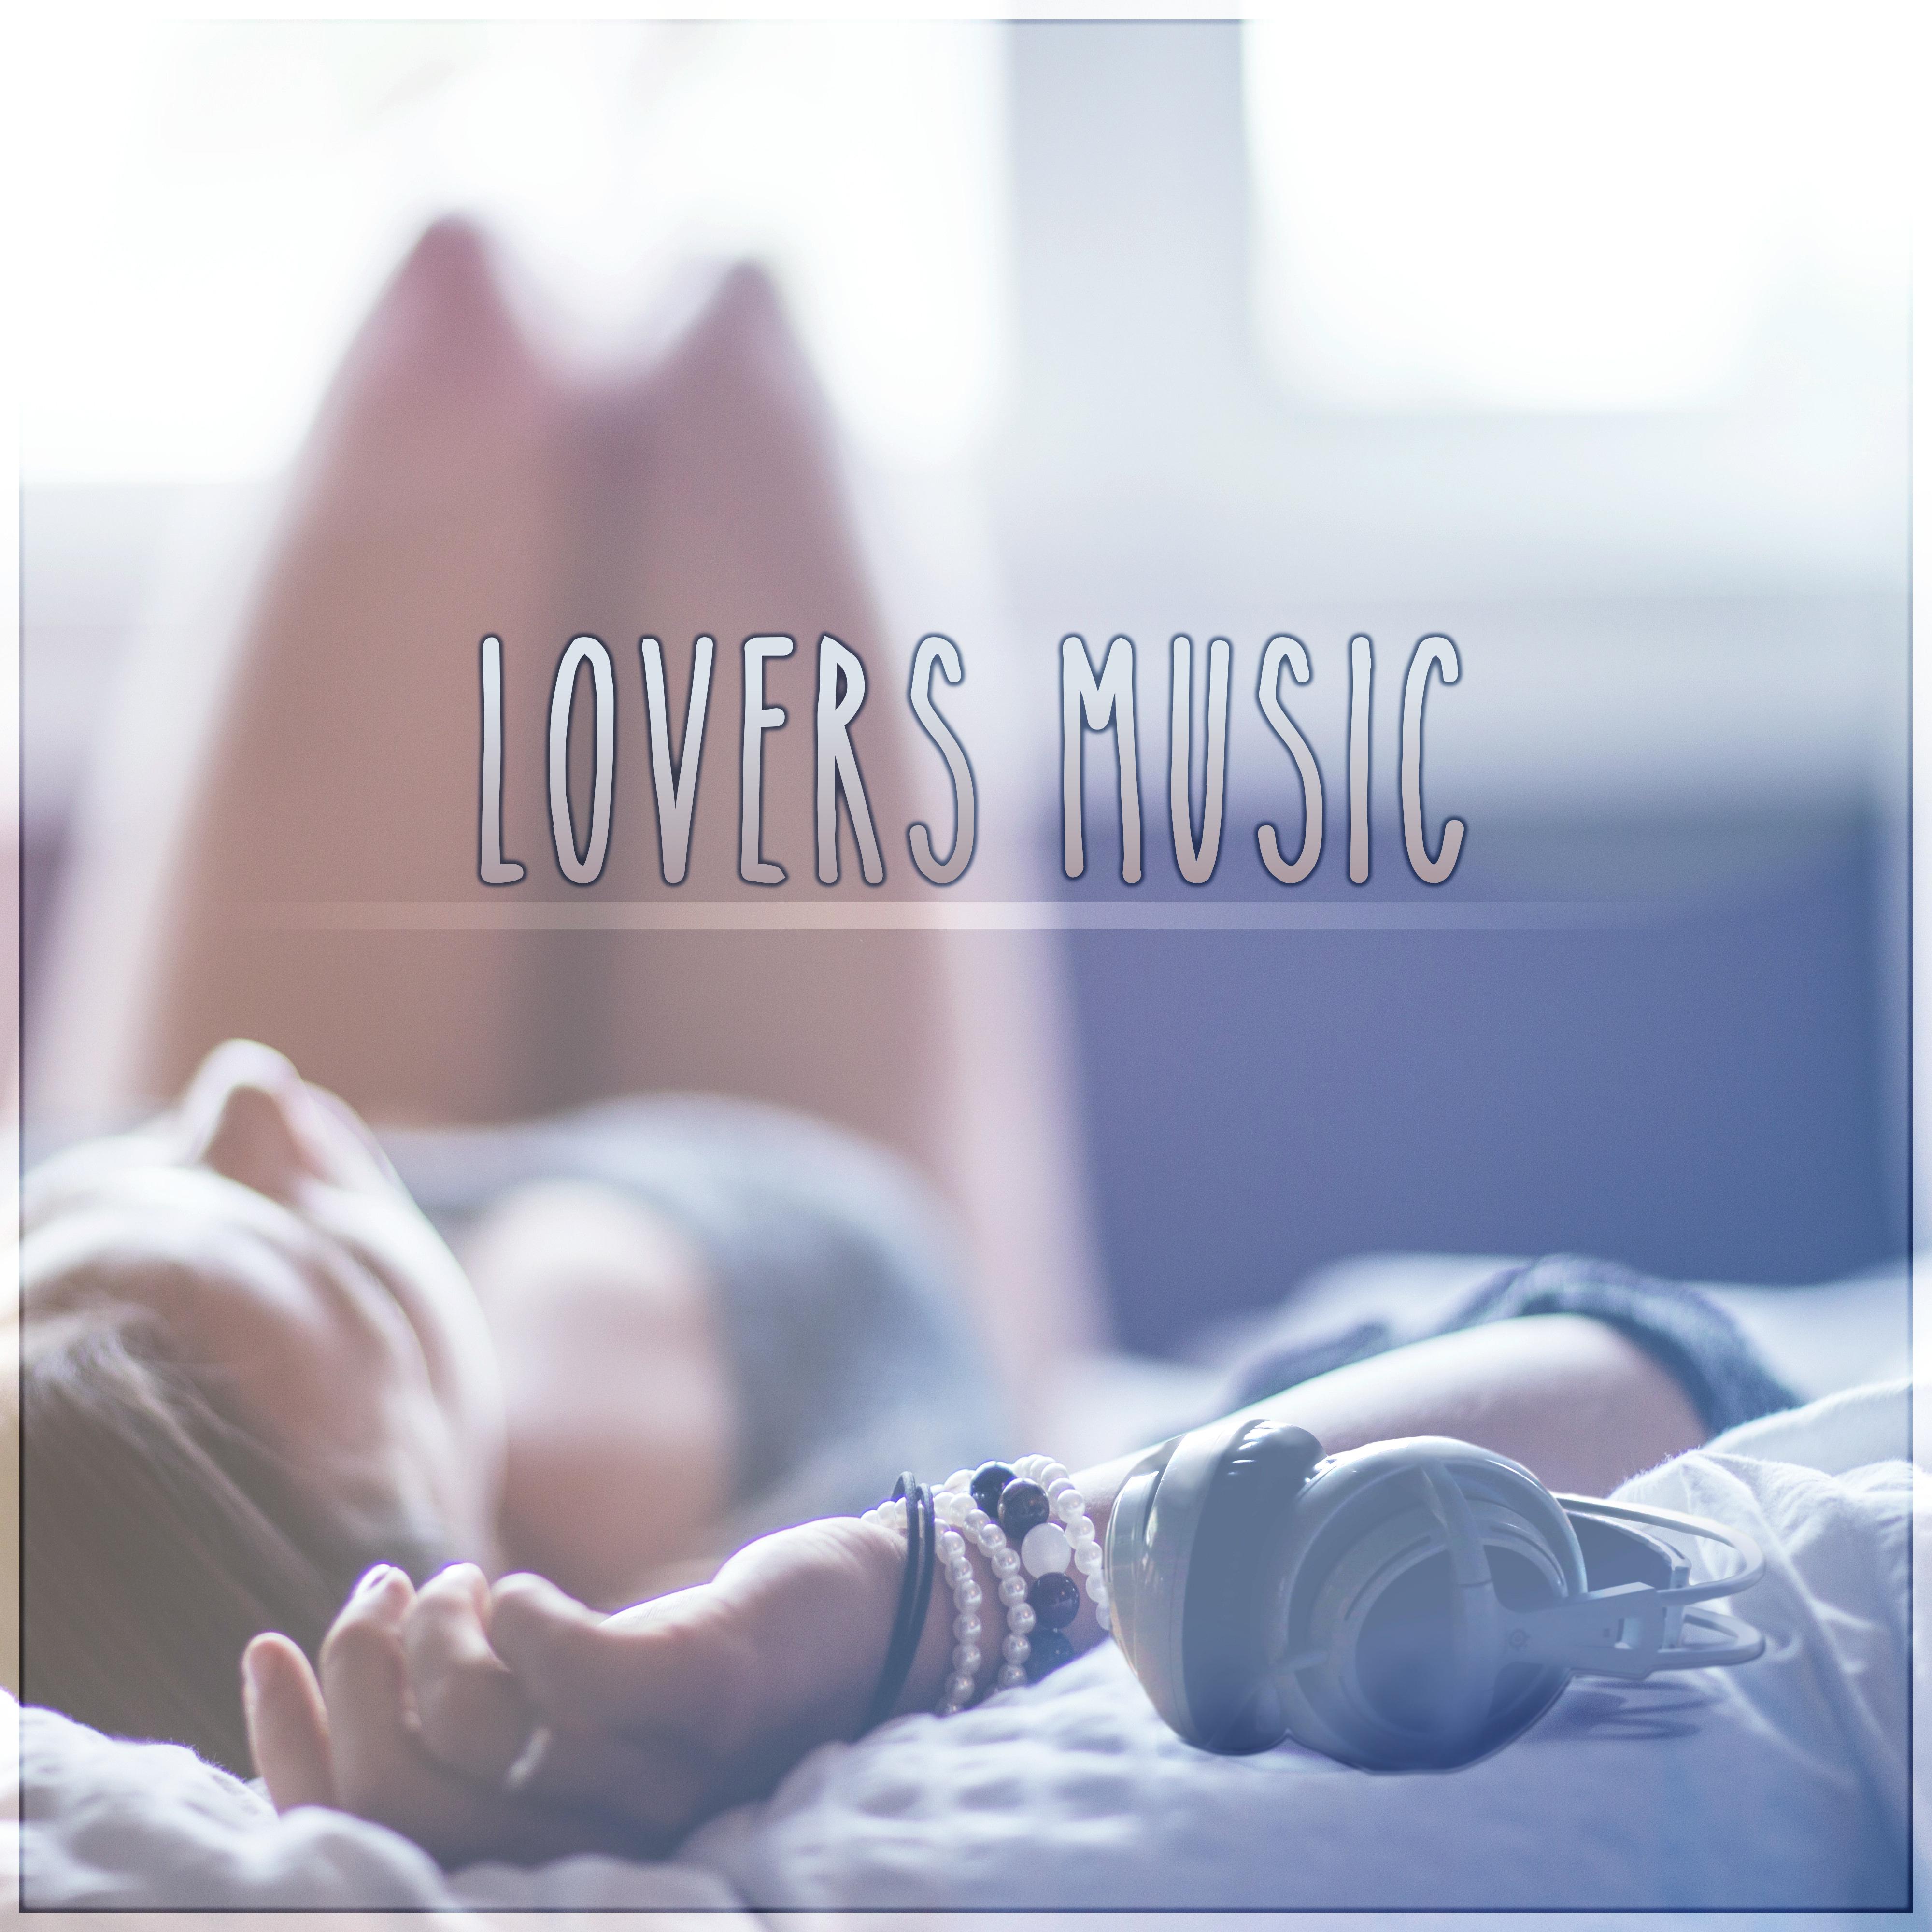 Lovers Music - Romantic Piano Music, Background Music for Wedding Anniversary, Love Songs for Honeymoon Romantic Dinner, Intimate Moments